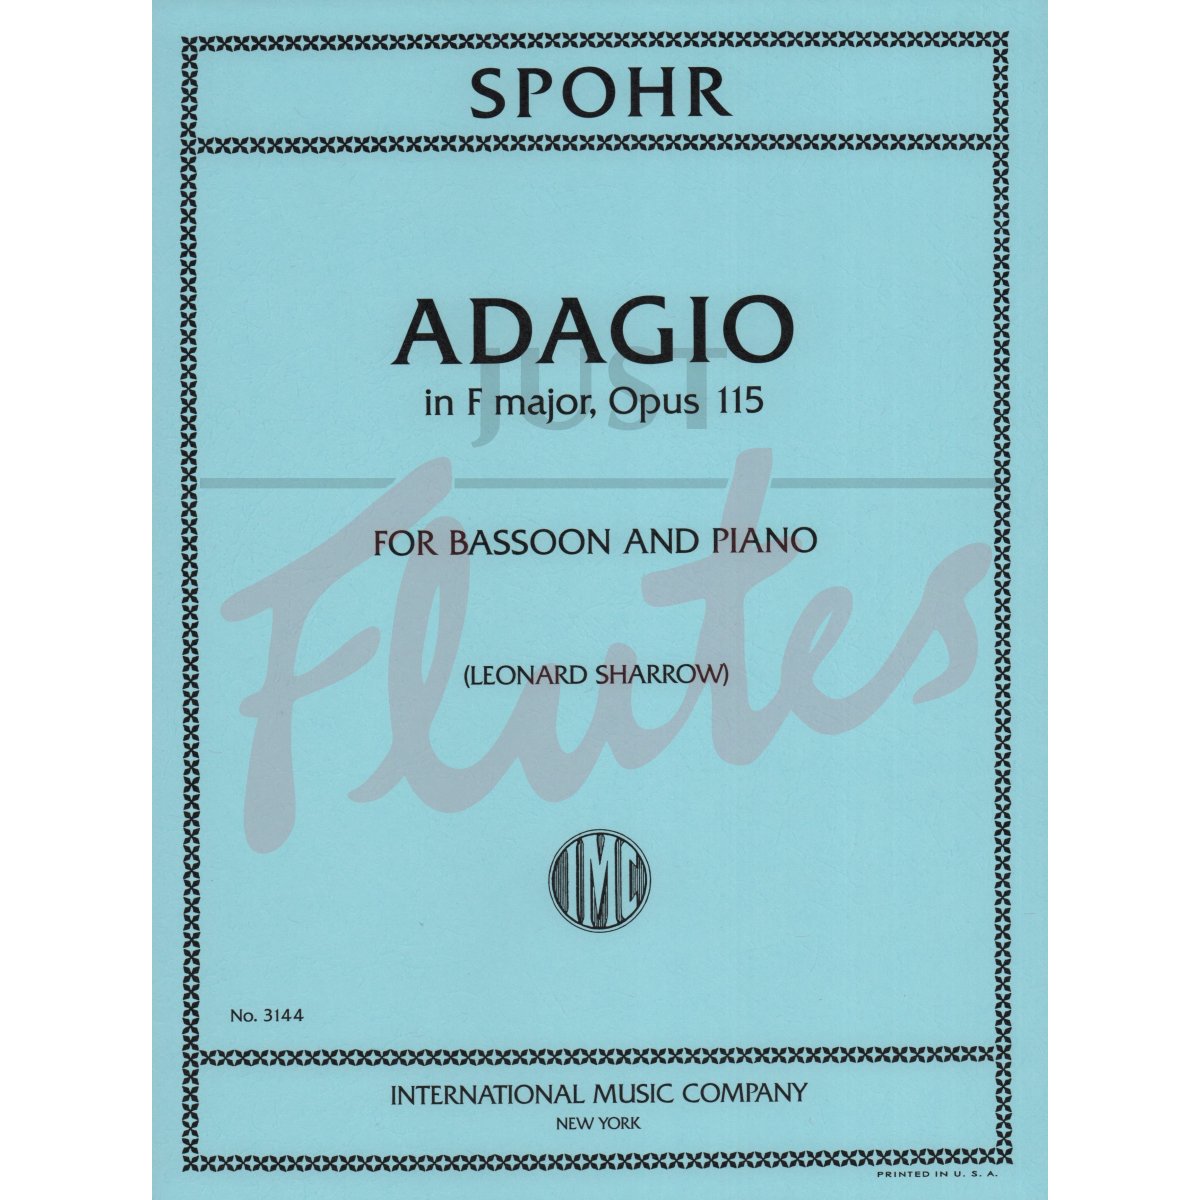 Adagio in F major for Bassoon and Piano